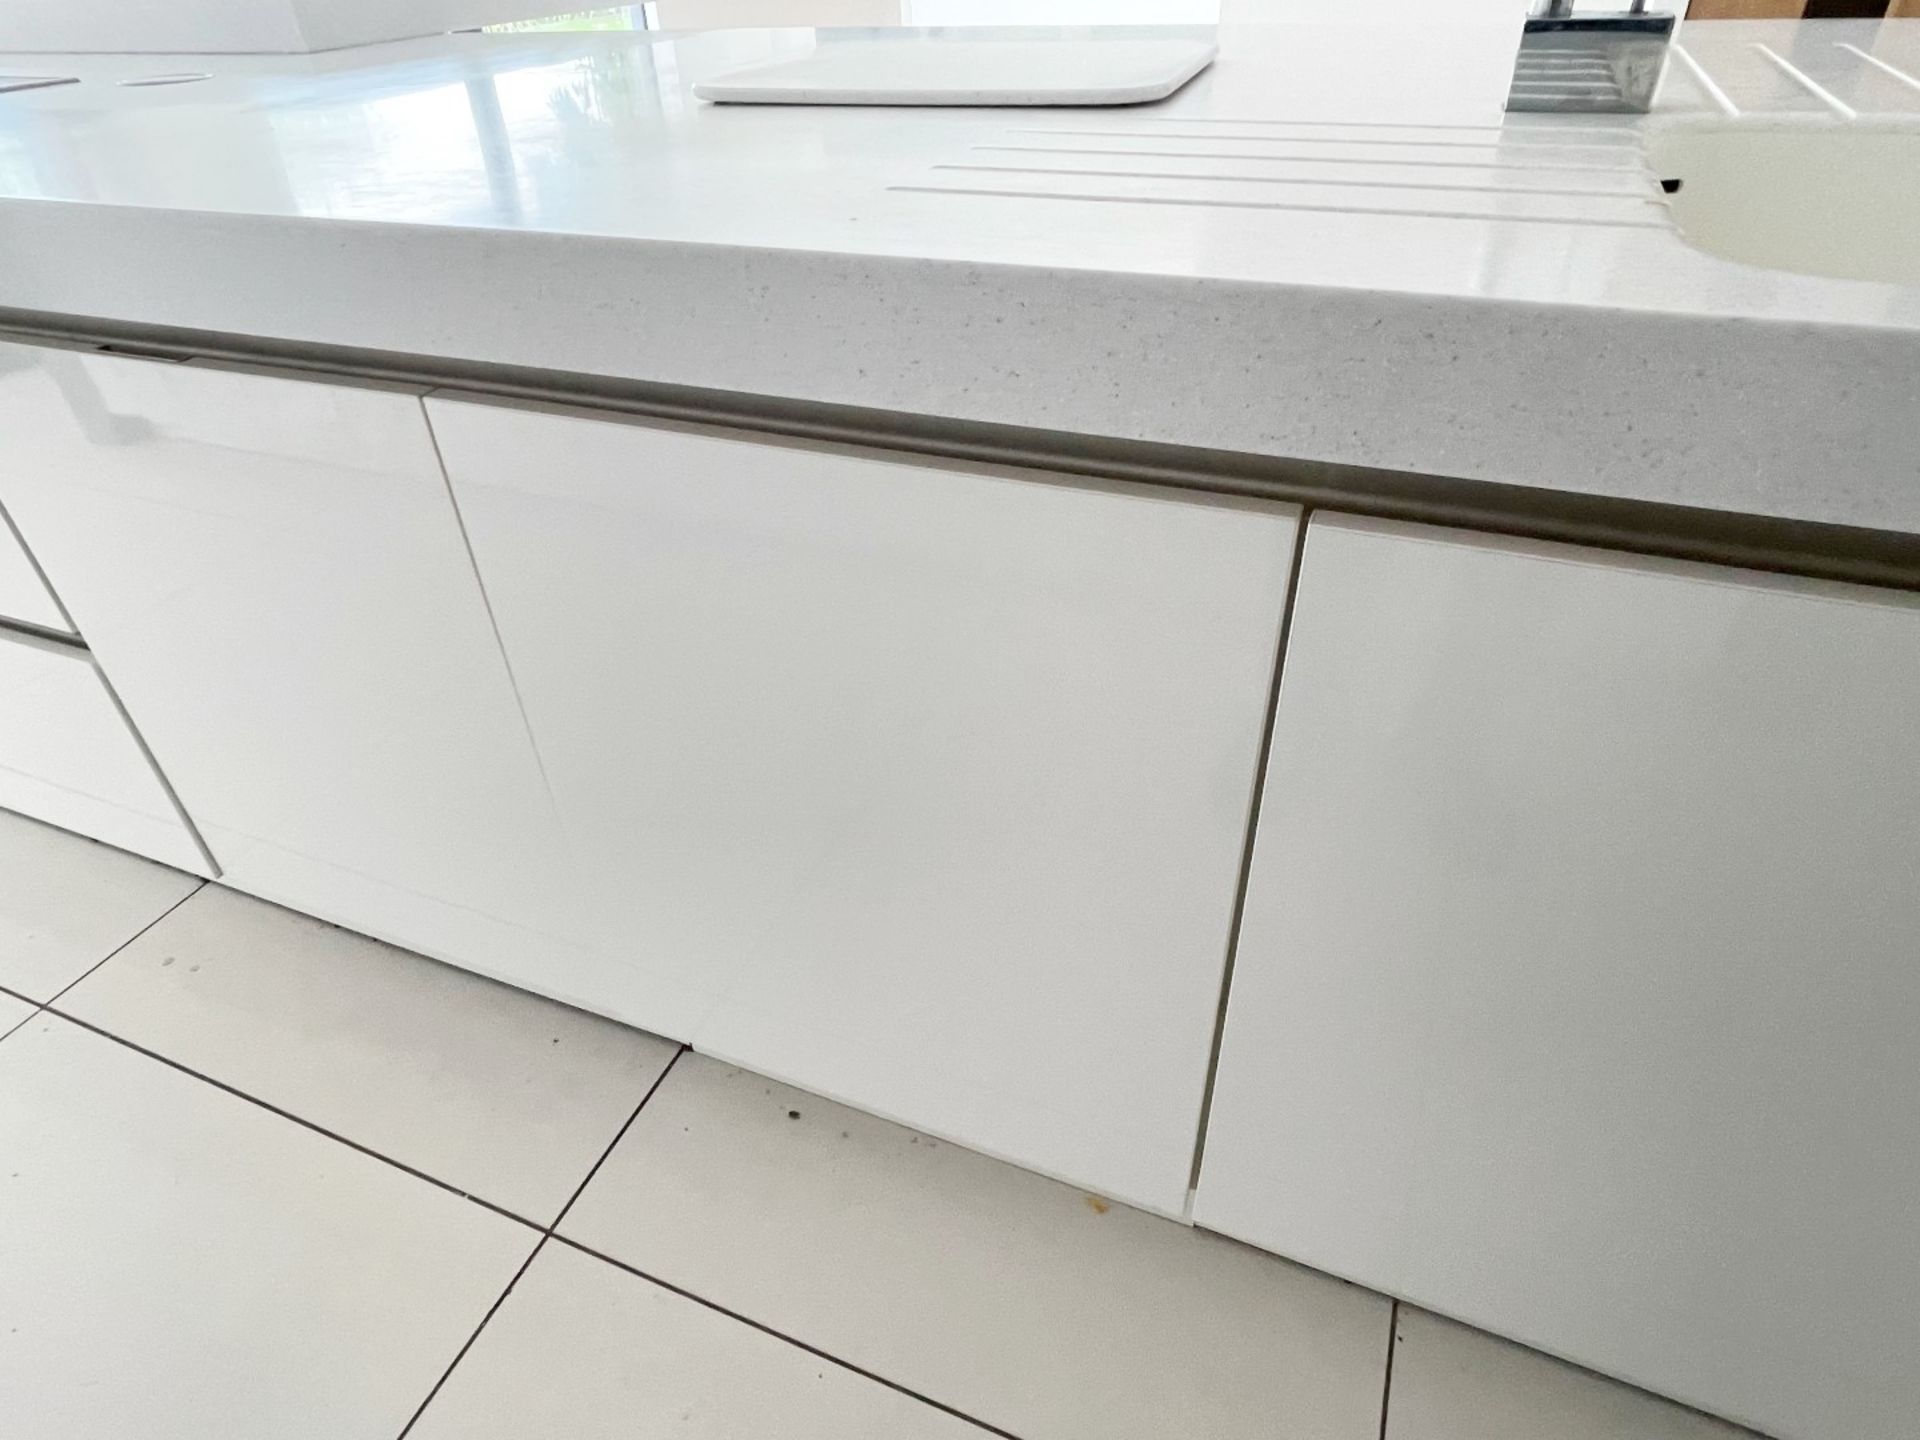 1 x SieMatic Contemporary Fitted Kitchen With Branded Appliances, Central Island + Corian Worktops - Image 52 of 100